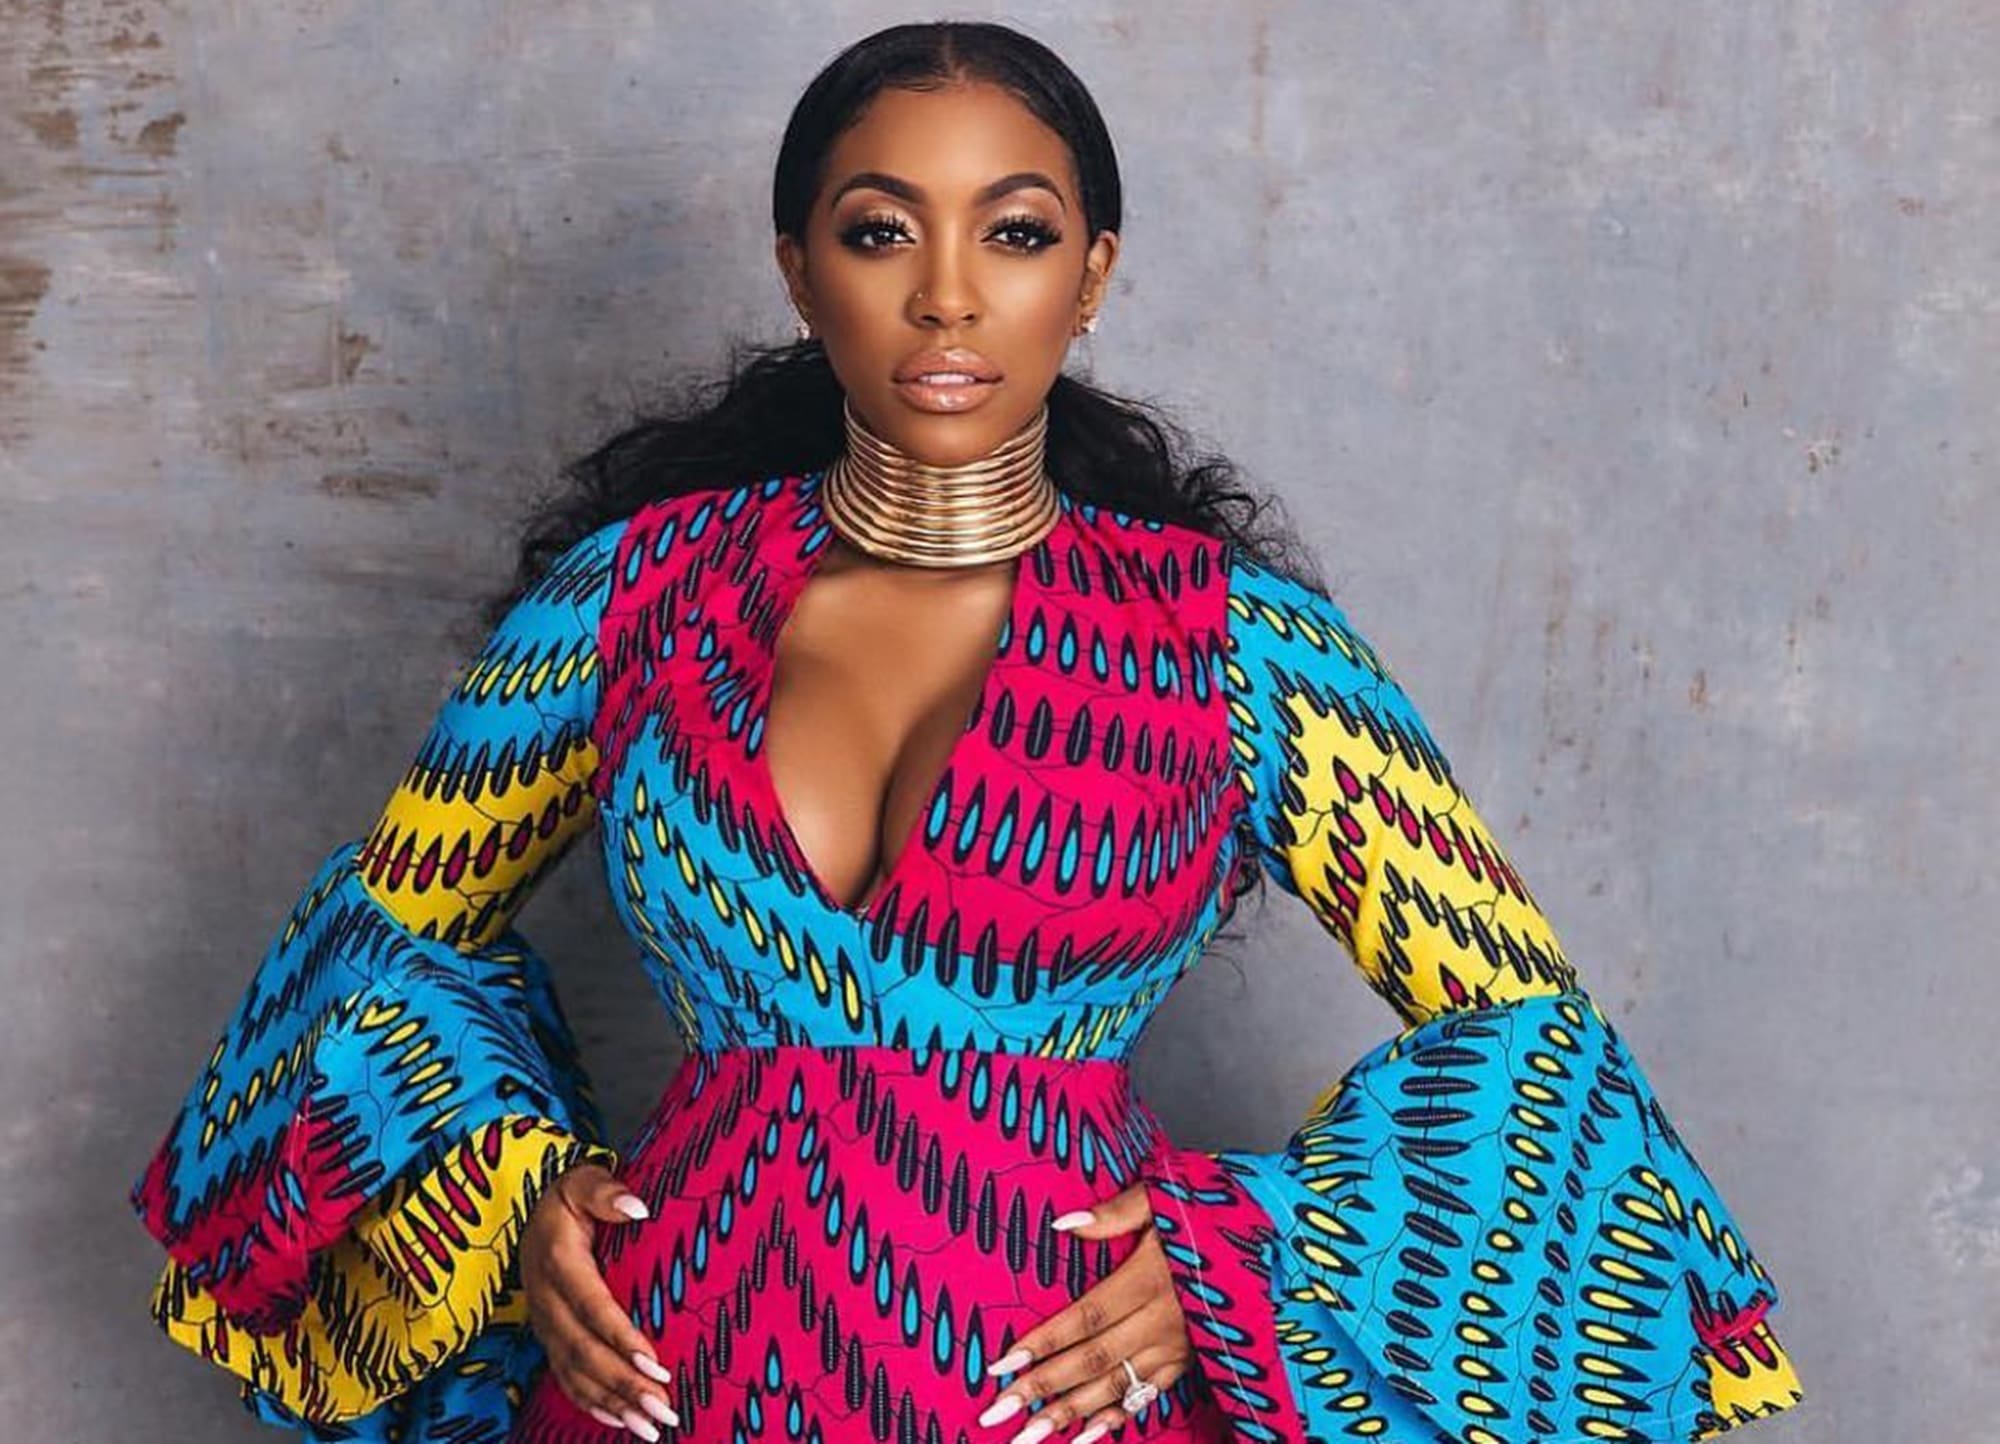 Porsha Williams Poses With Her Natural Look And Her Baby In Her Arms: 'I Officially Don't Care What I Look Like' - Fans Defend Her From Haters Who Criticize Her